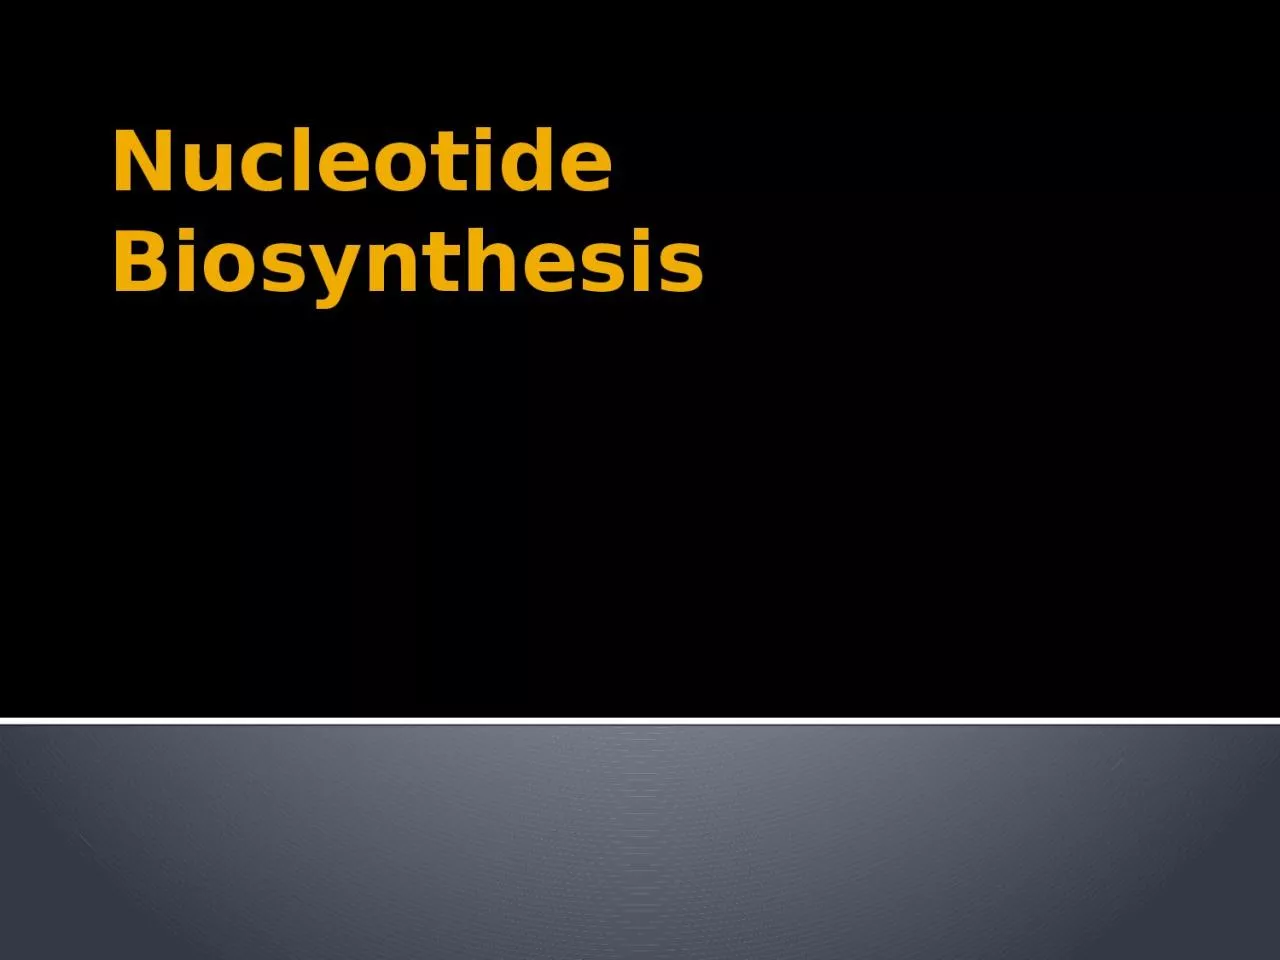 Nucleotide Biosynthesis nucleotides is essential for